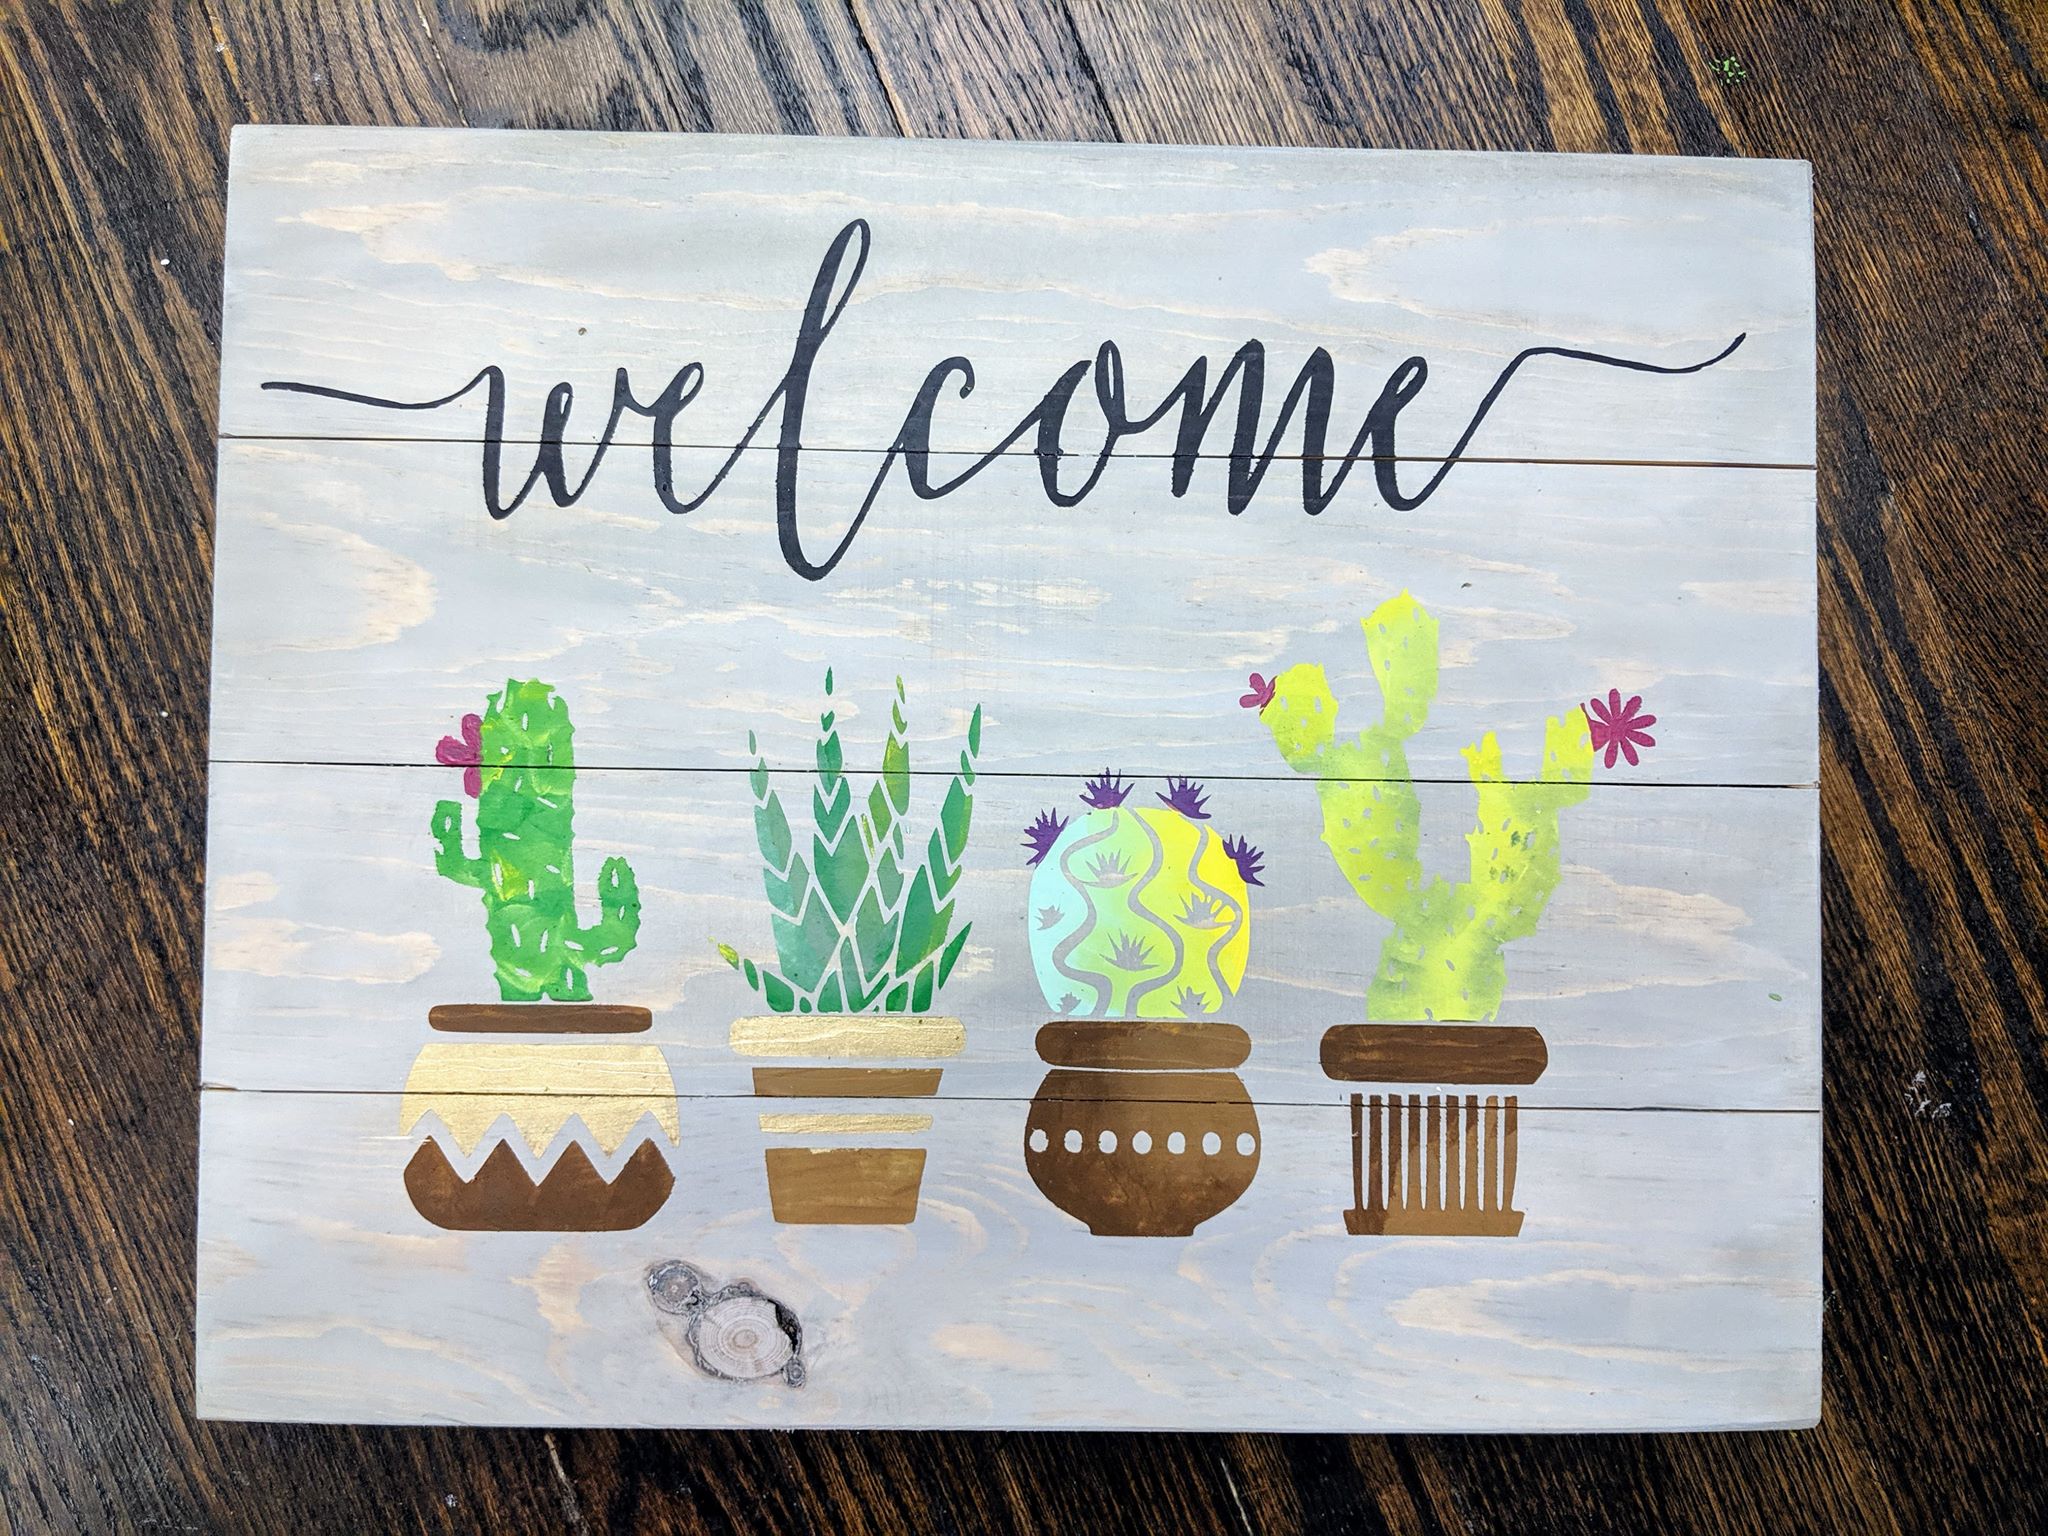 Welcome with cactus